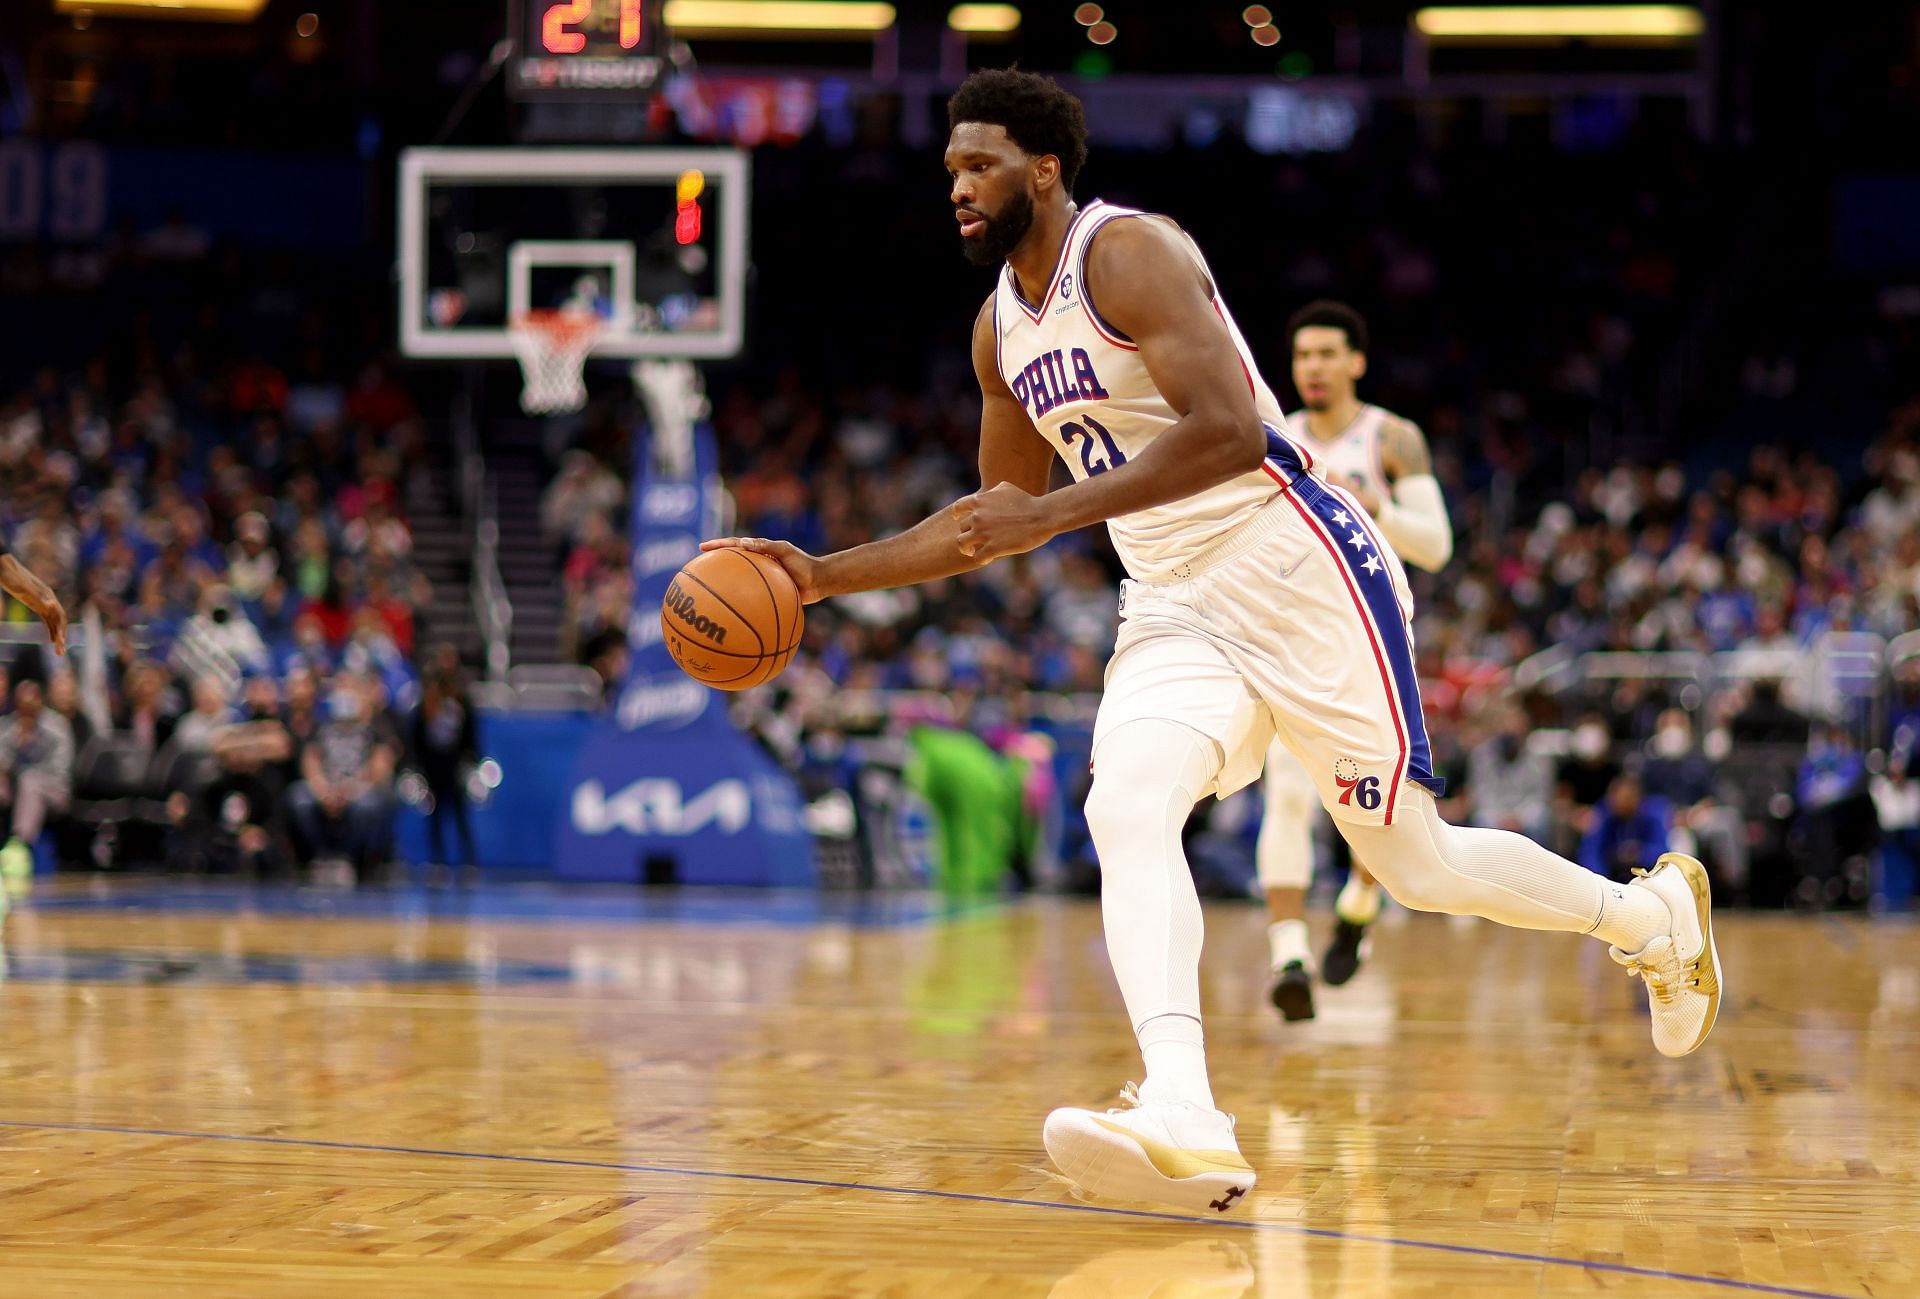 Embiid in action for the Philadelphia 76ers vs. Orlando Magic.